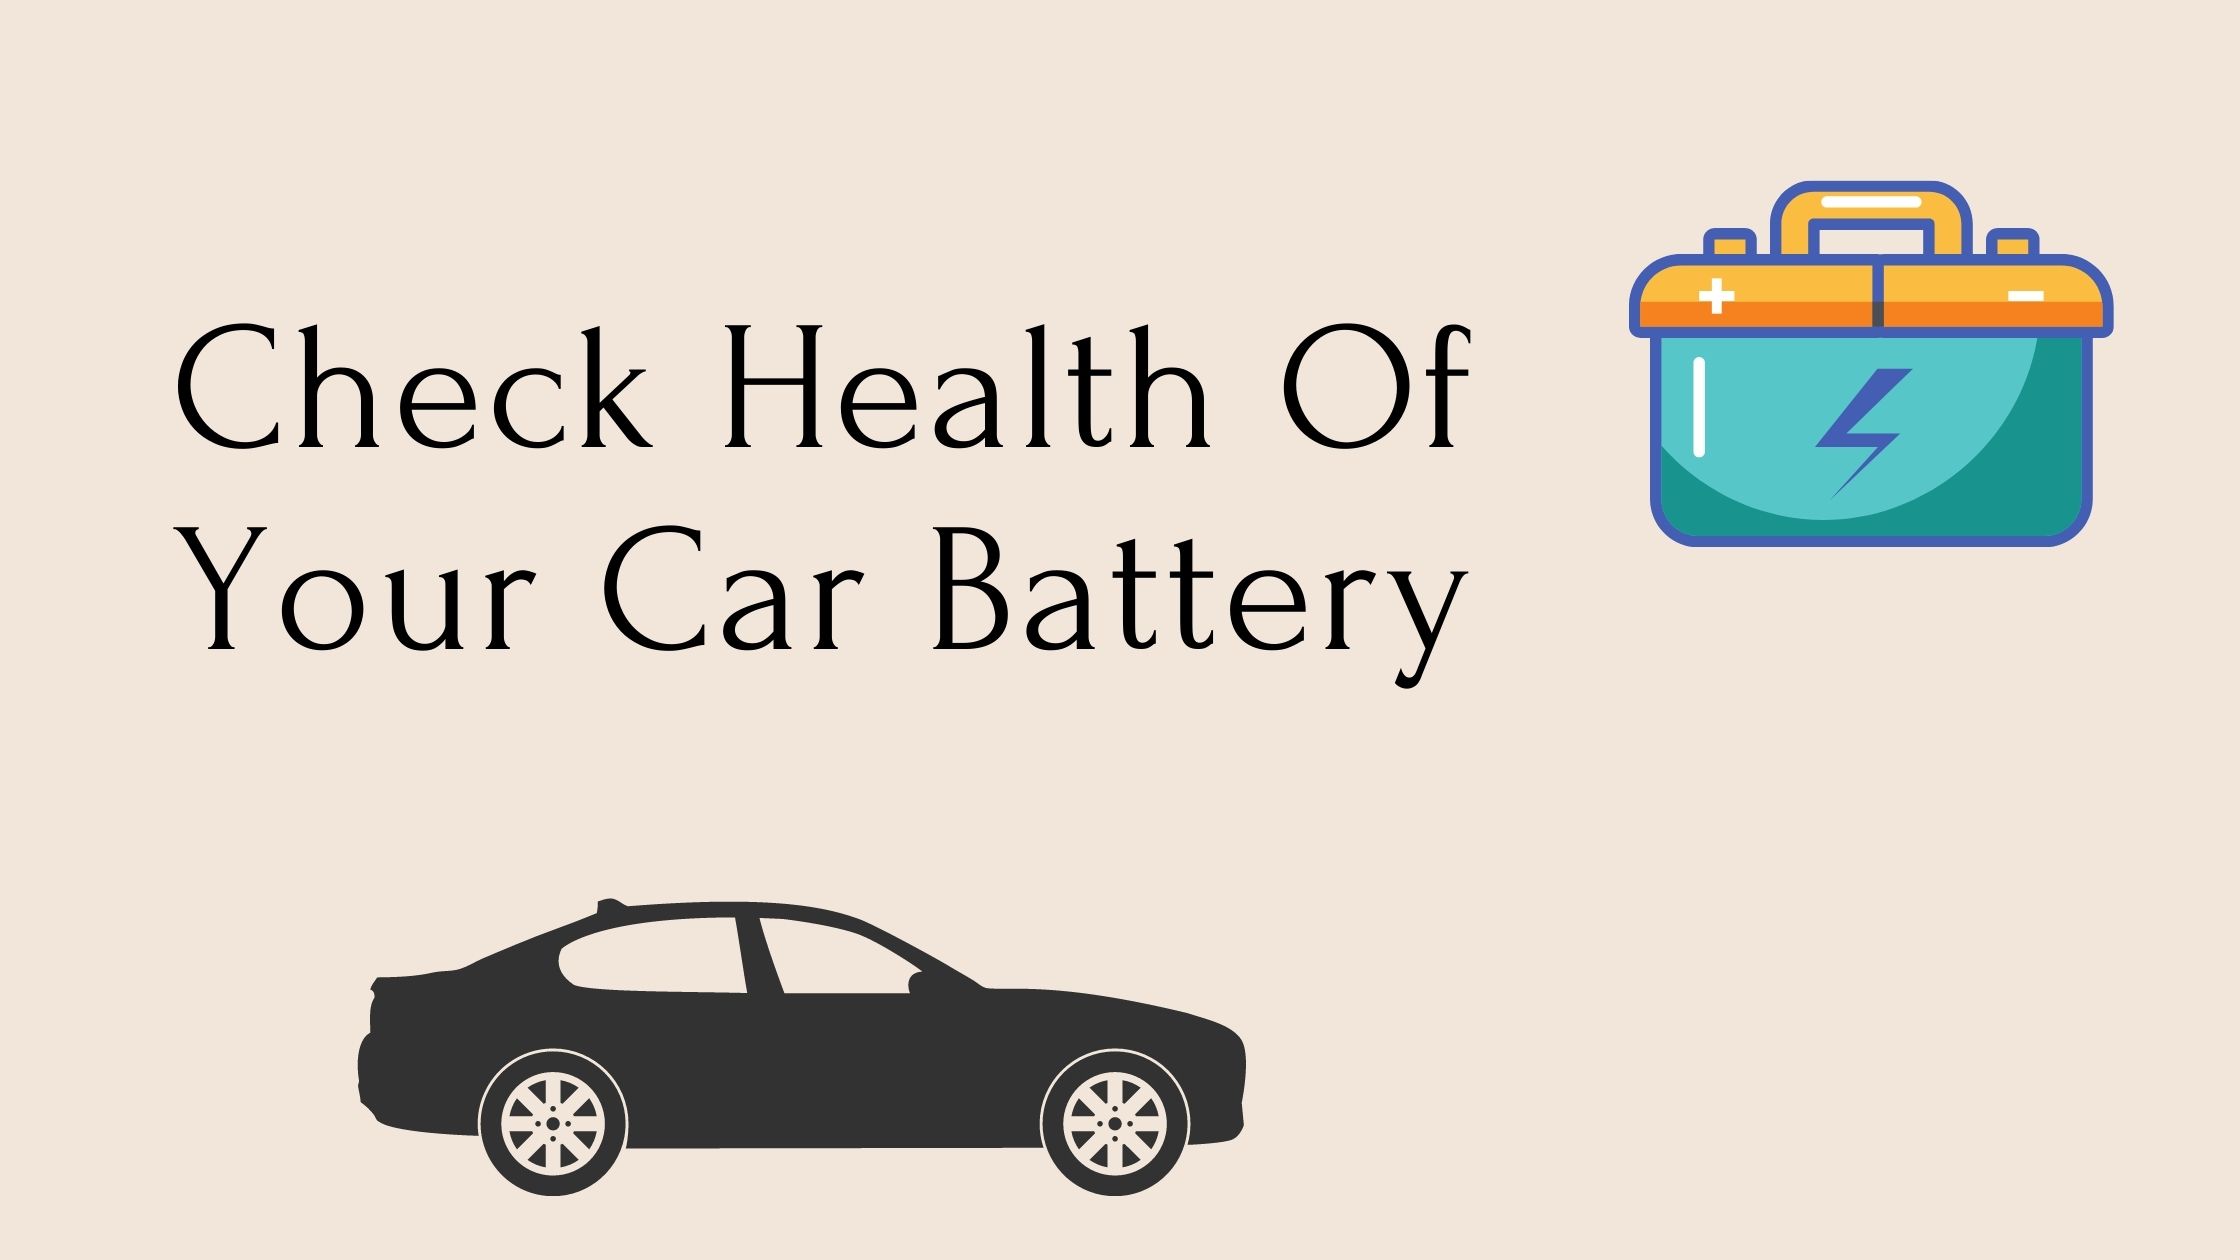 15 Quick Tips to Check Health Of Your Car Battery